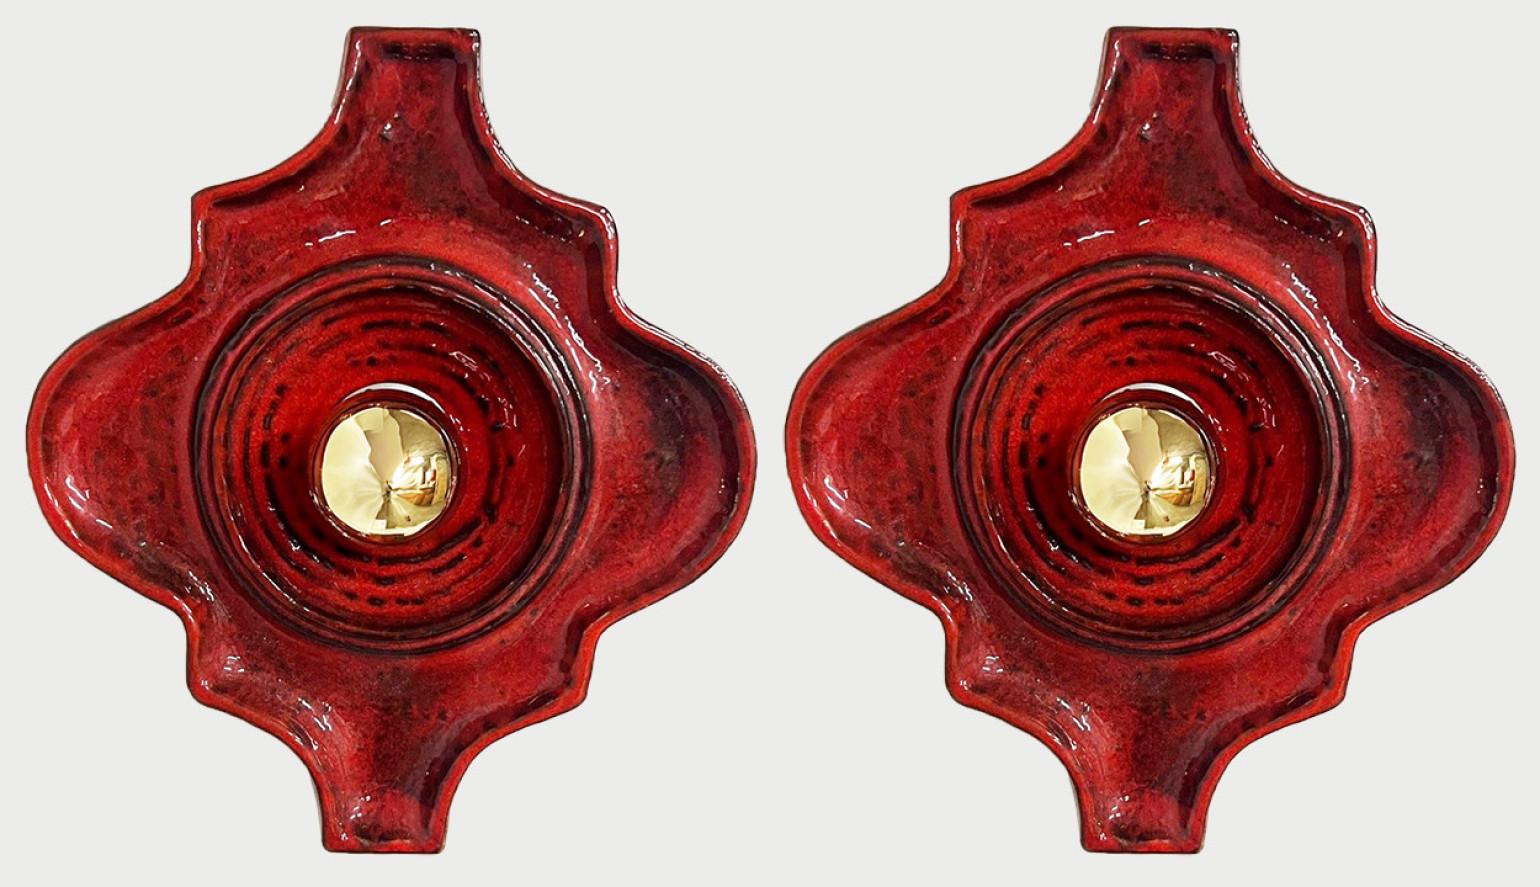 Curved red ceramic wall lights. Manufactured by Hustadt Leuchten, Germany in the 1970s.
We used gold light bulbs (see images), but silver light bulbs are also very stylish.

Measurements:
Width: 8.66 in (22 cm)
Heigth: 9.45 in (24 cm)
Depth: